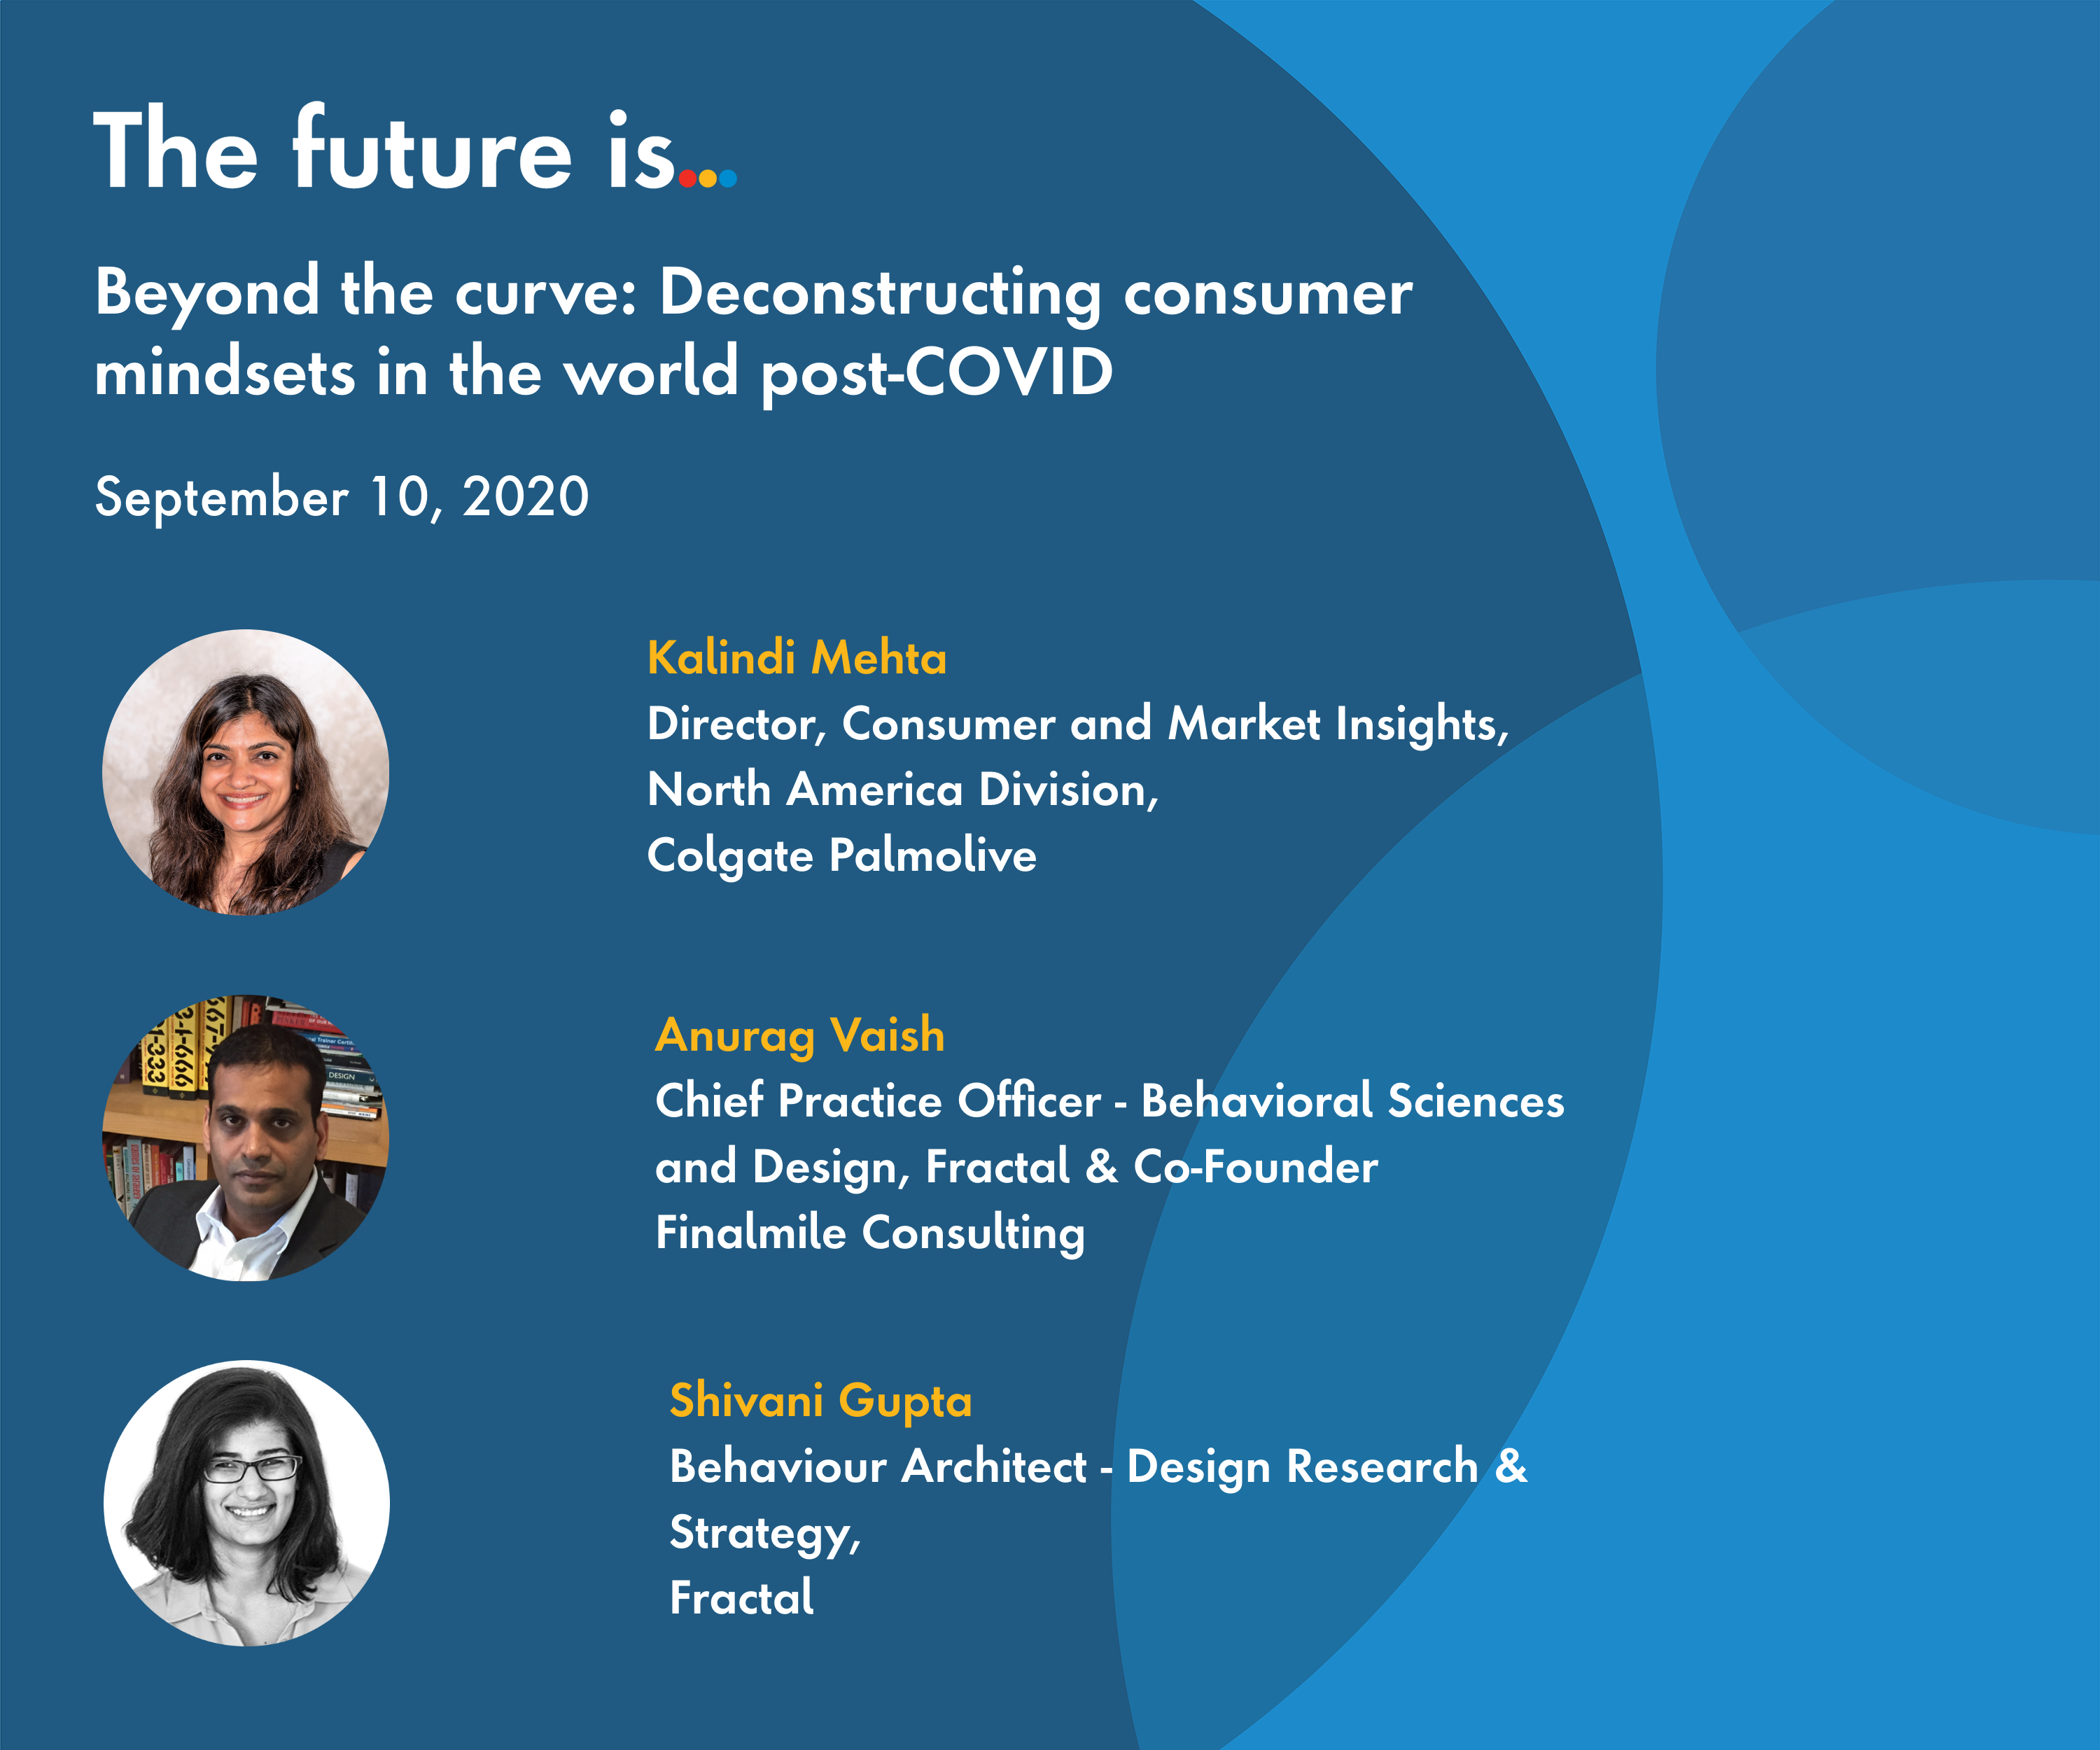 Beyond the curve: Deconstructing consumer mindsets in the world post-COVID